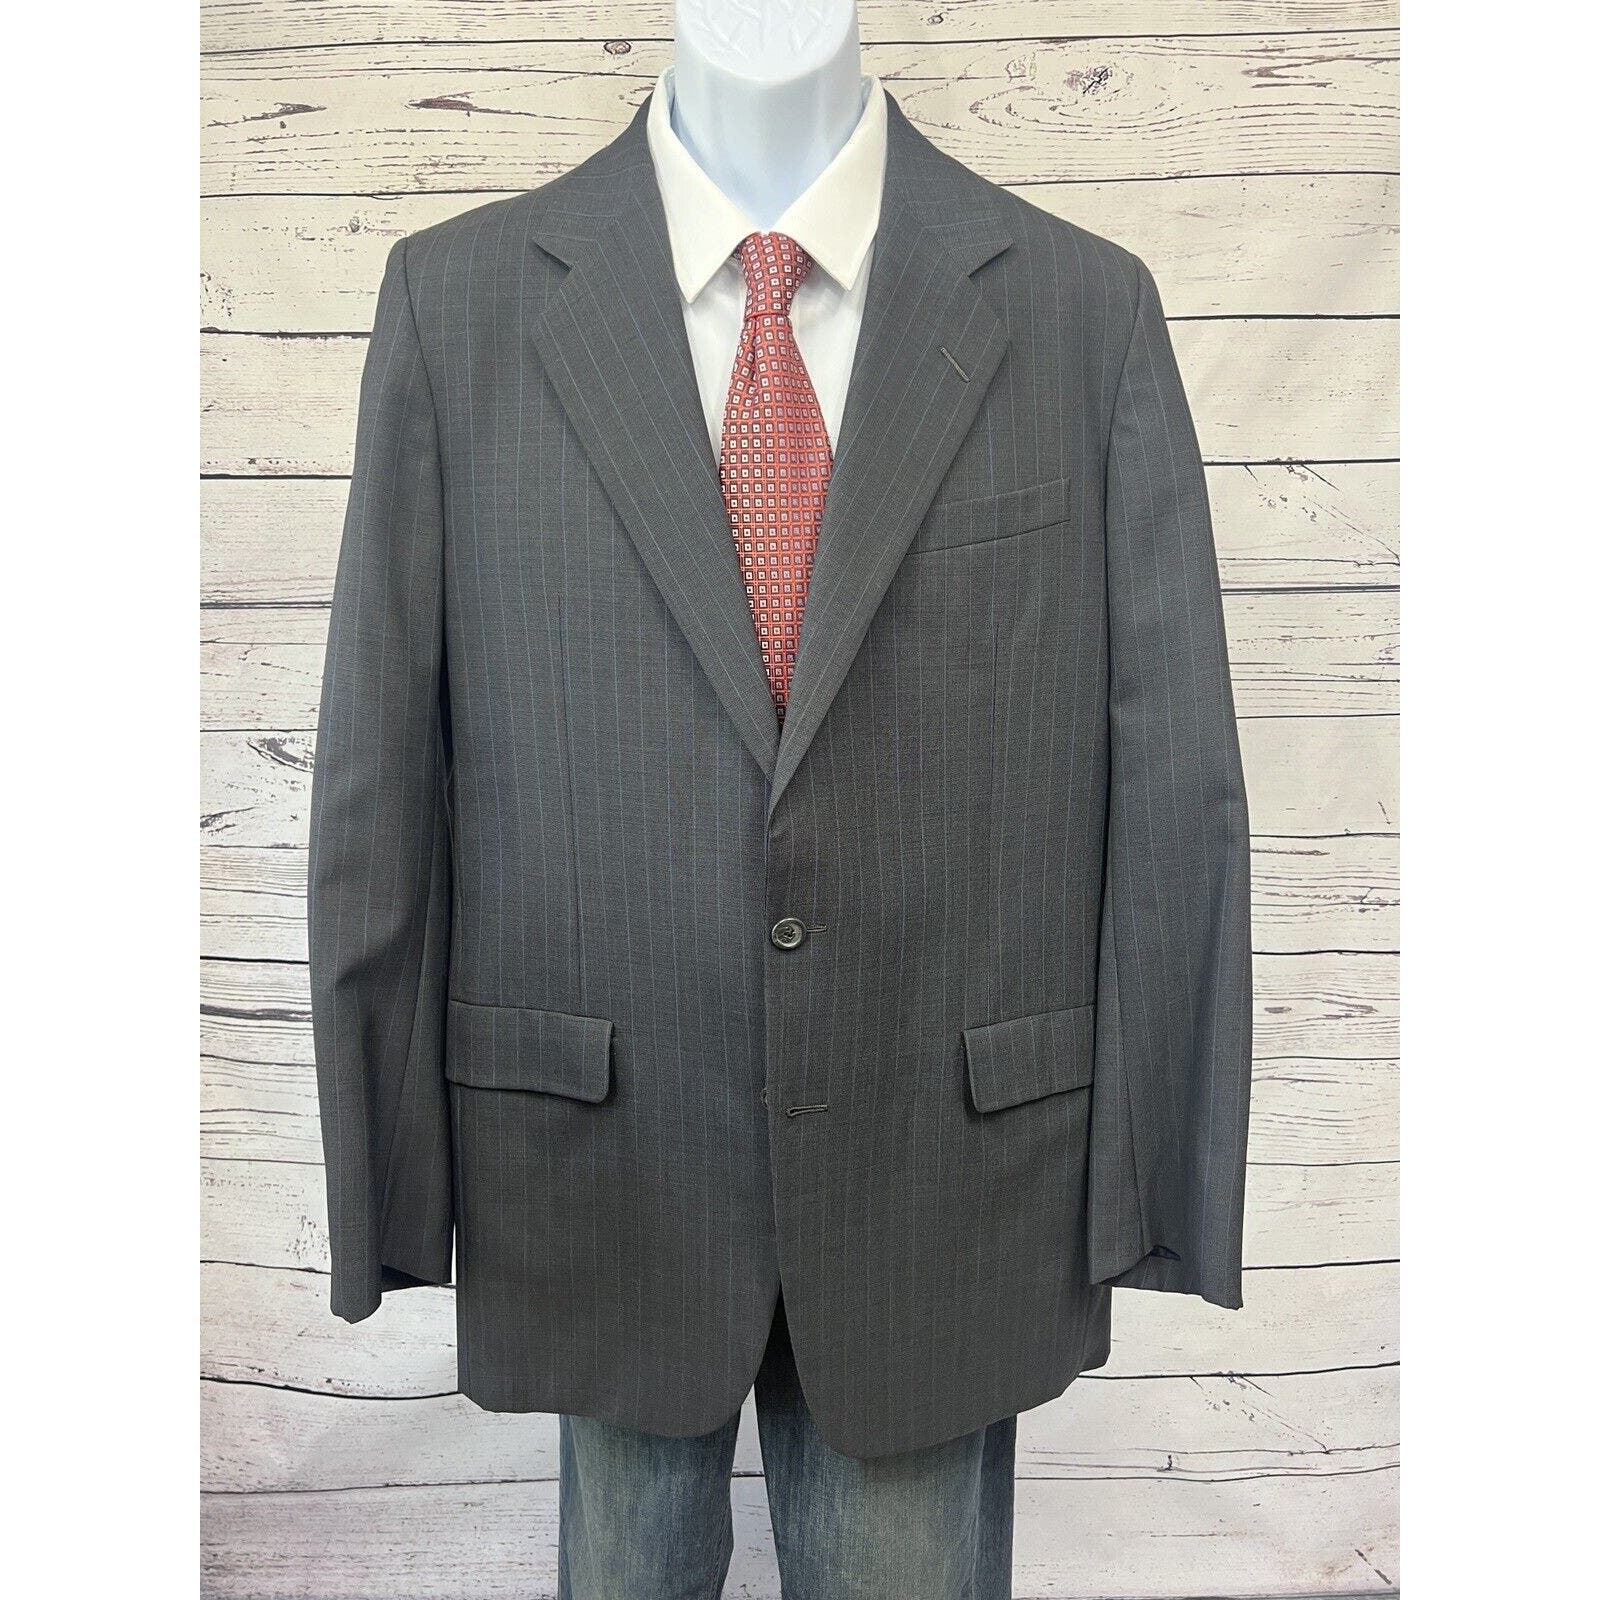 Hickey Freeman For Bergdorf Goodman Men’s Suit 38L Boardroom Collection 34/33.5